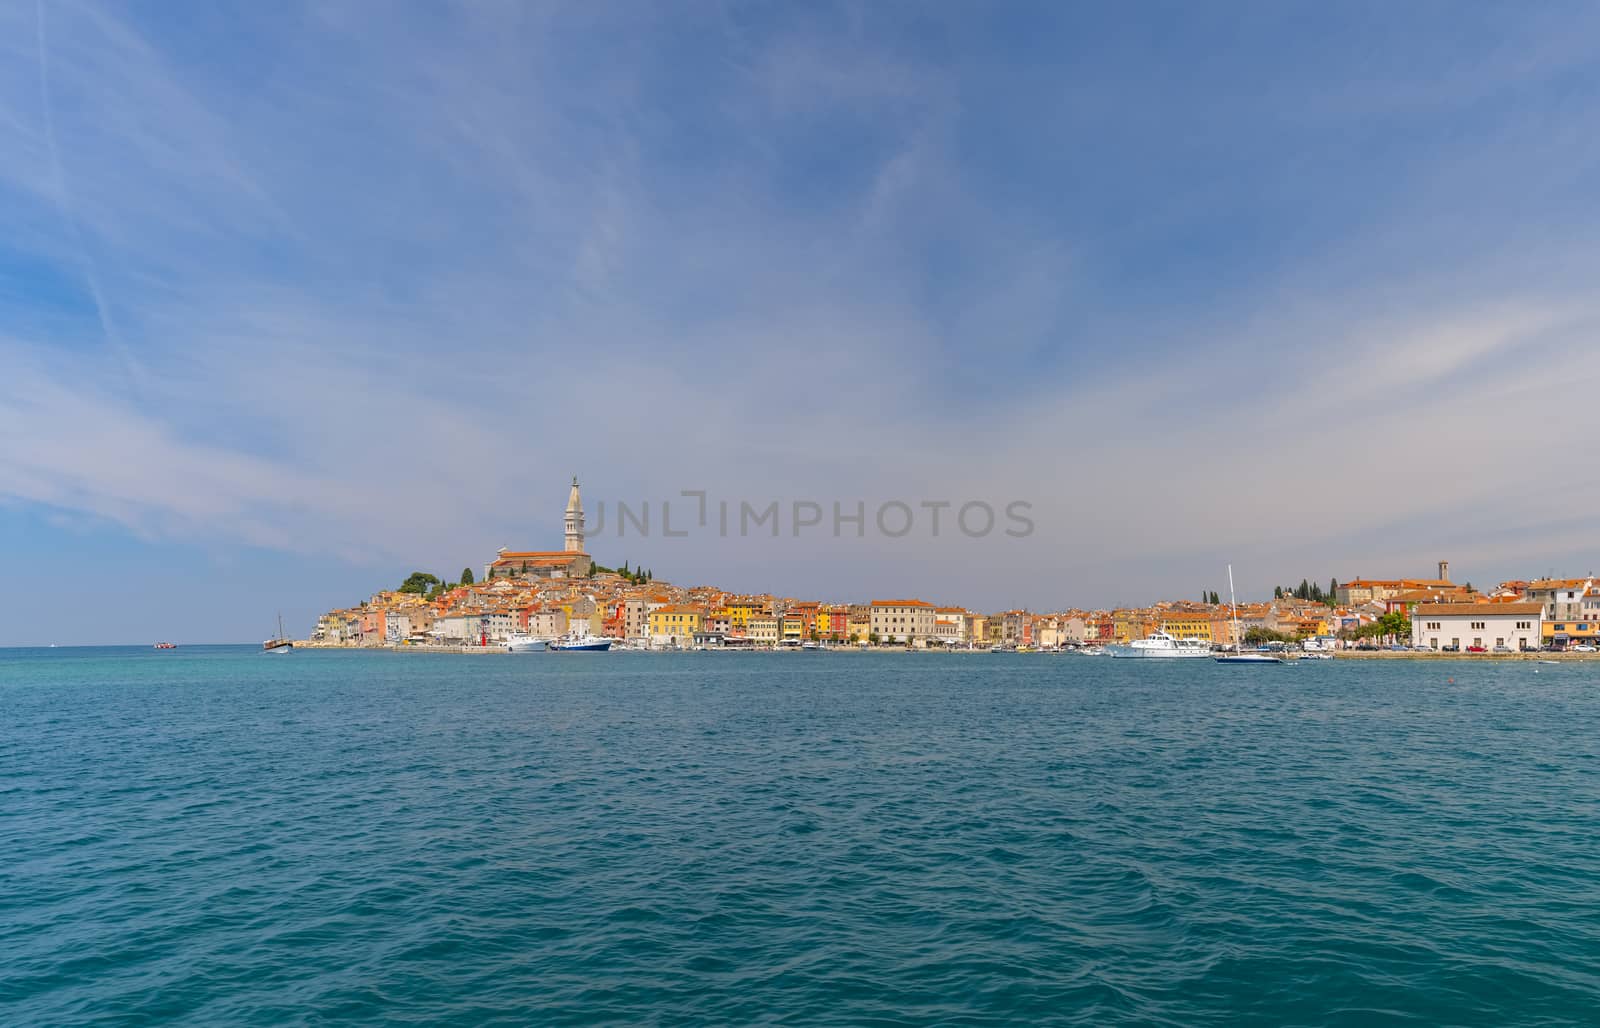 Rovinj, Croatia - May 1, 2017: unique view on the medieval tovn of Rovinj as seen from the sea